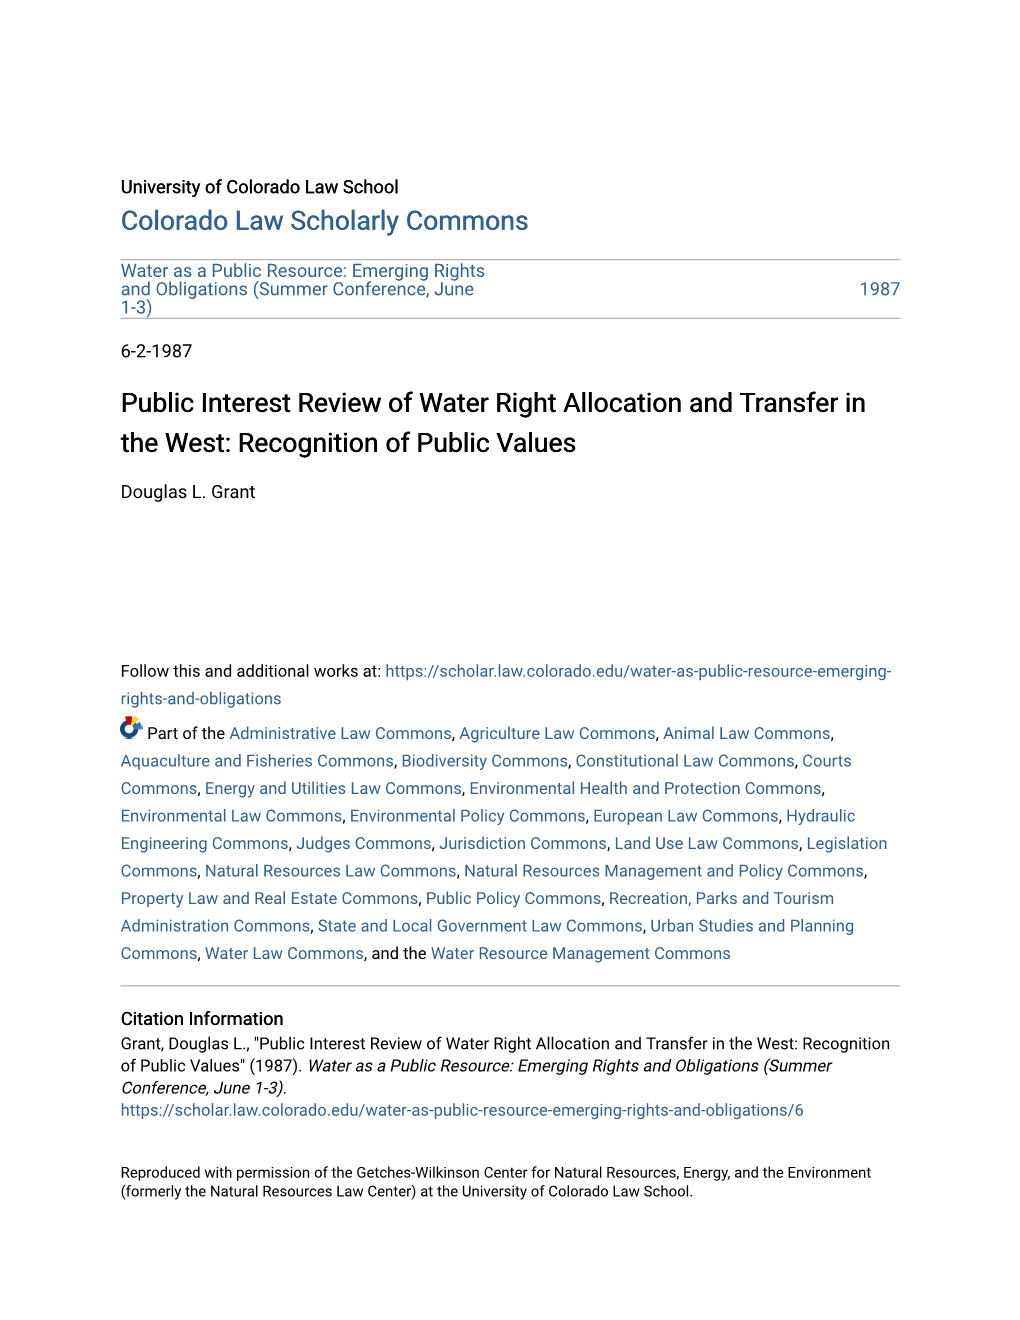 Public Interest Review of Water Right Allocation and Transfer in the West: Recognition of Public Values